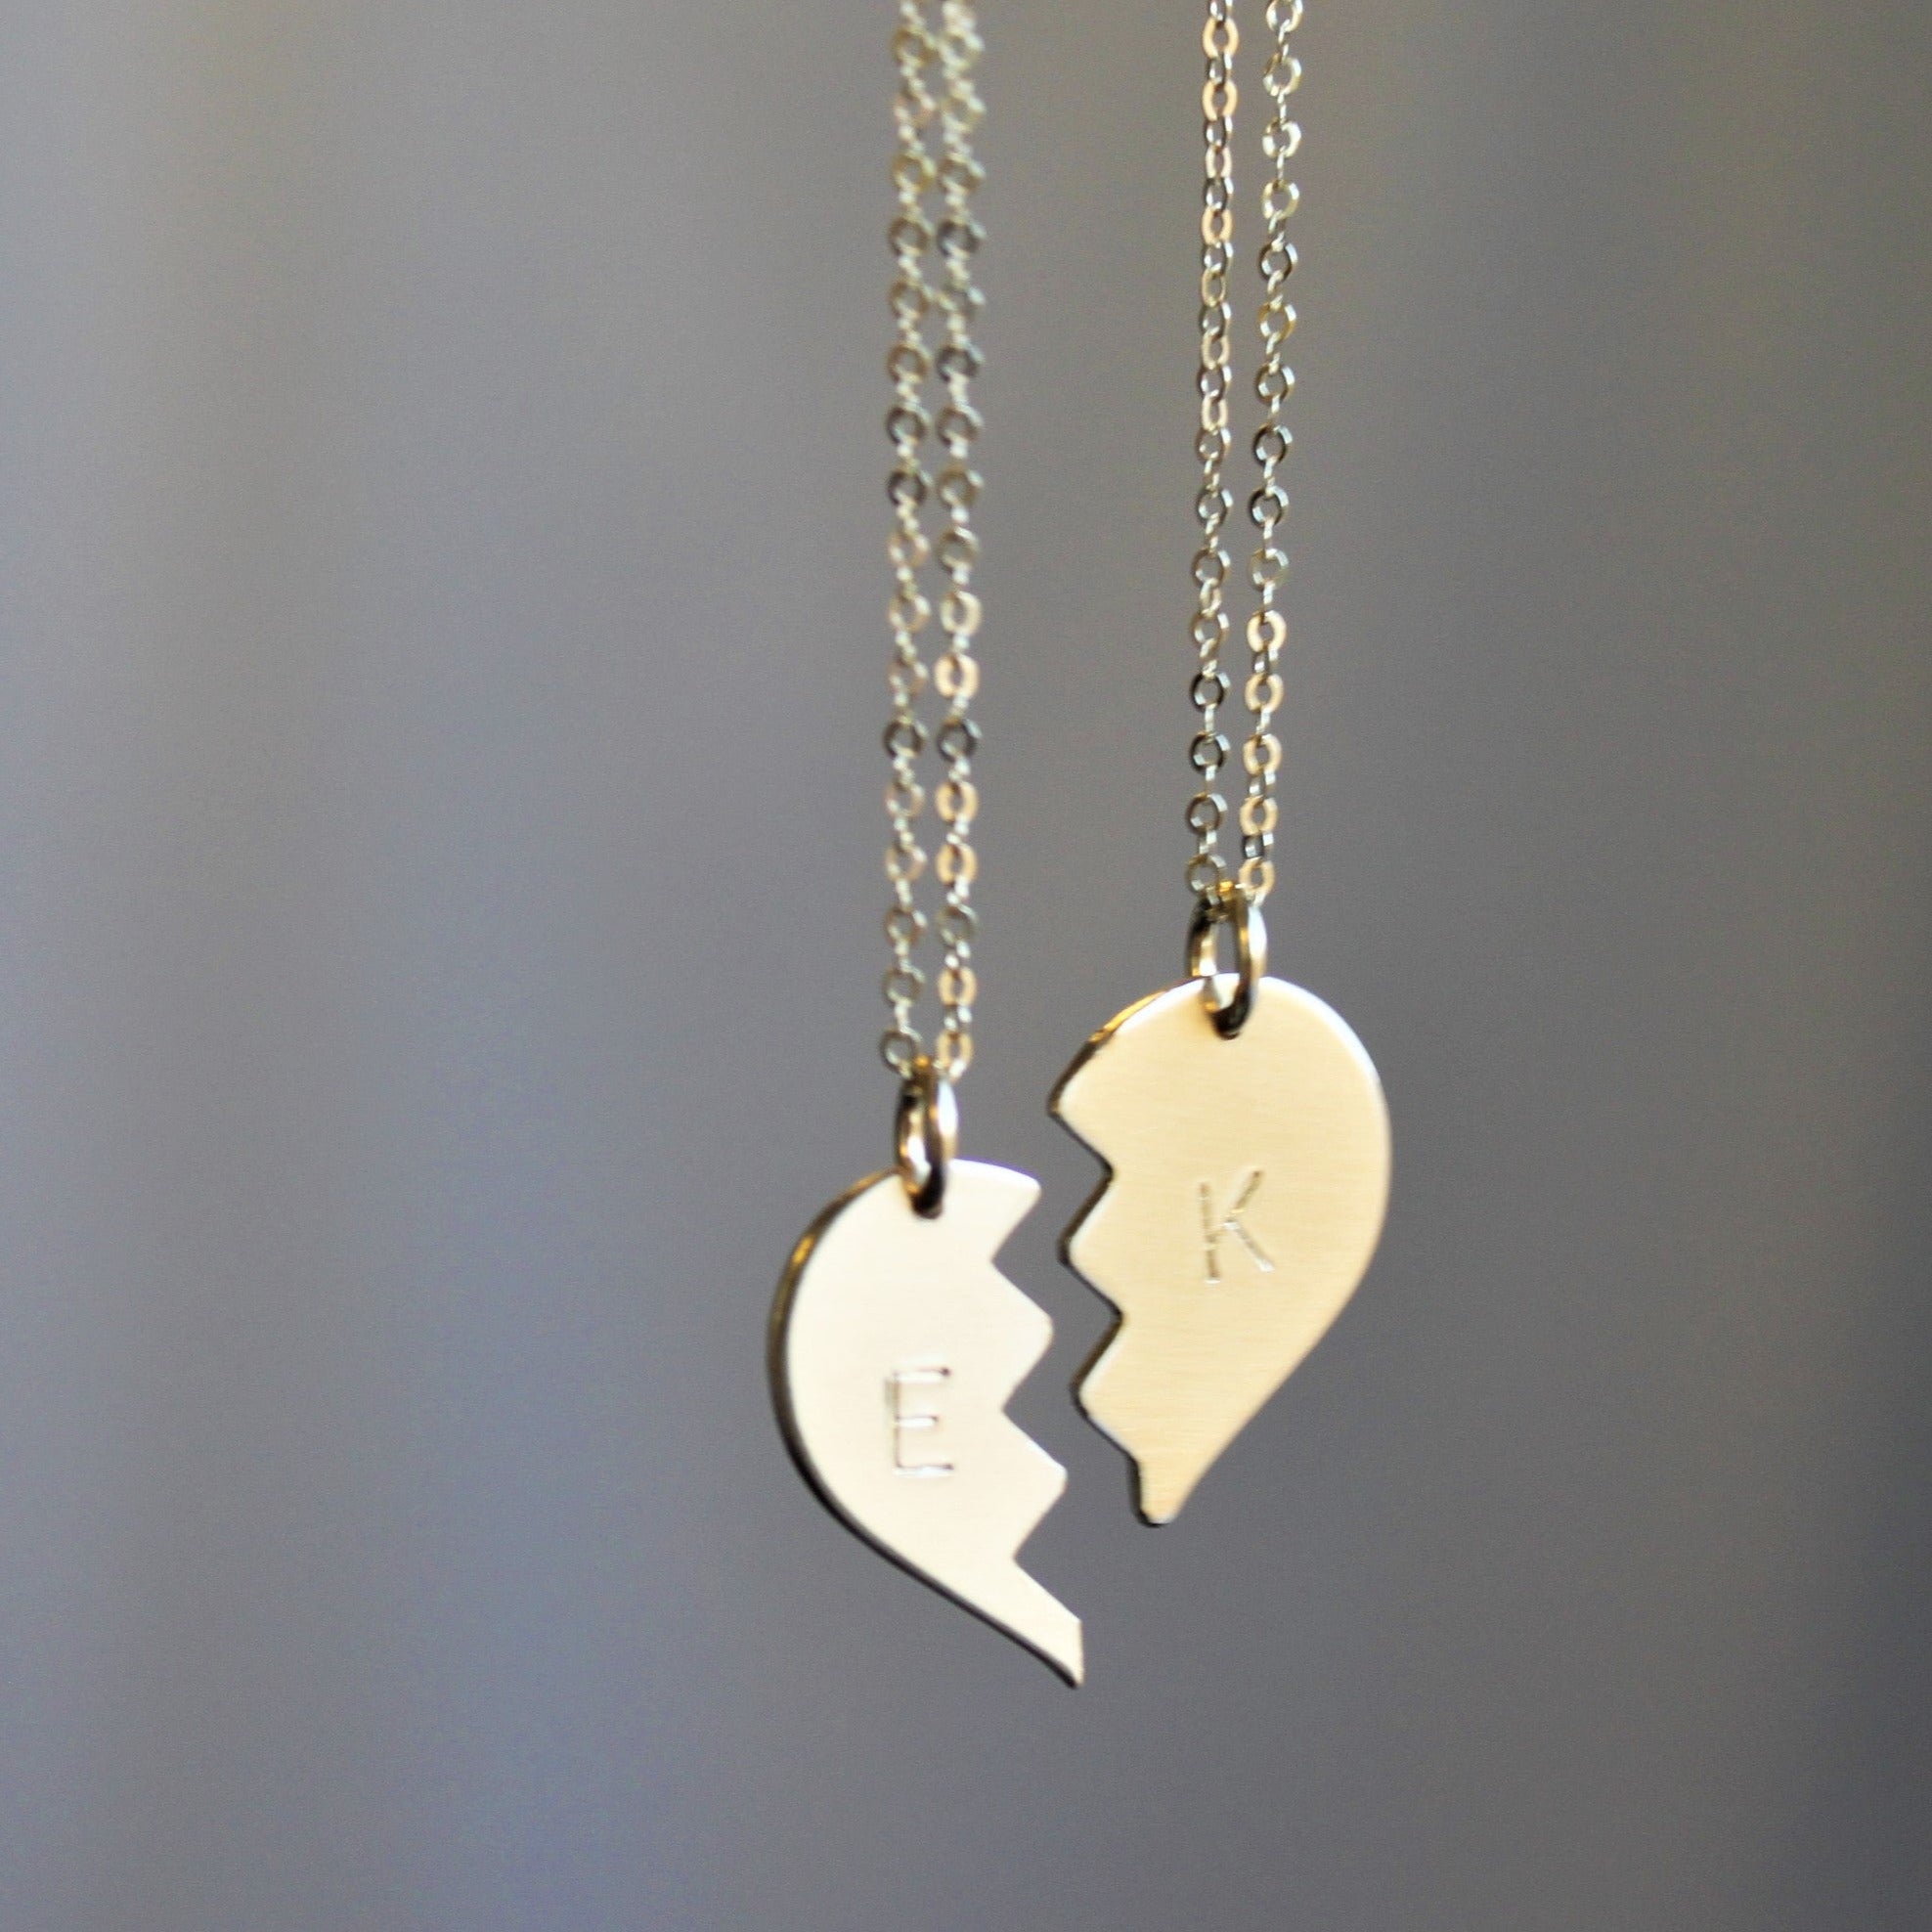 Gold,Rose Gold And Silver Sterling Silver Broken Heart Iced Out Pendant  With Chain Unisex Jewellery